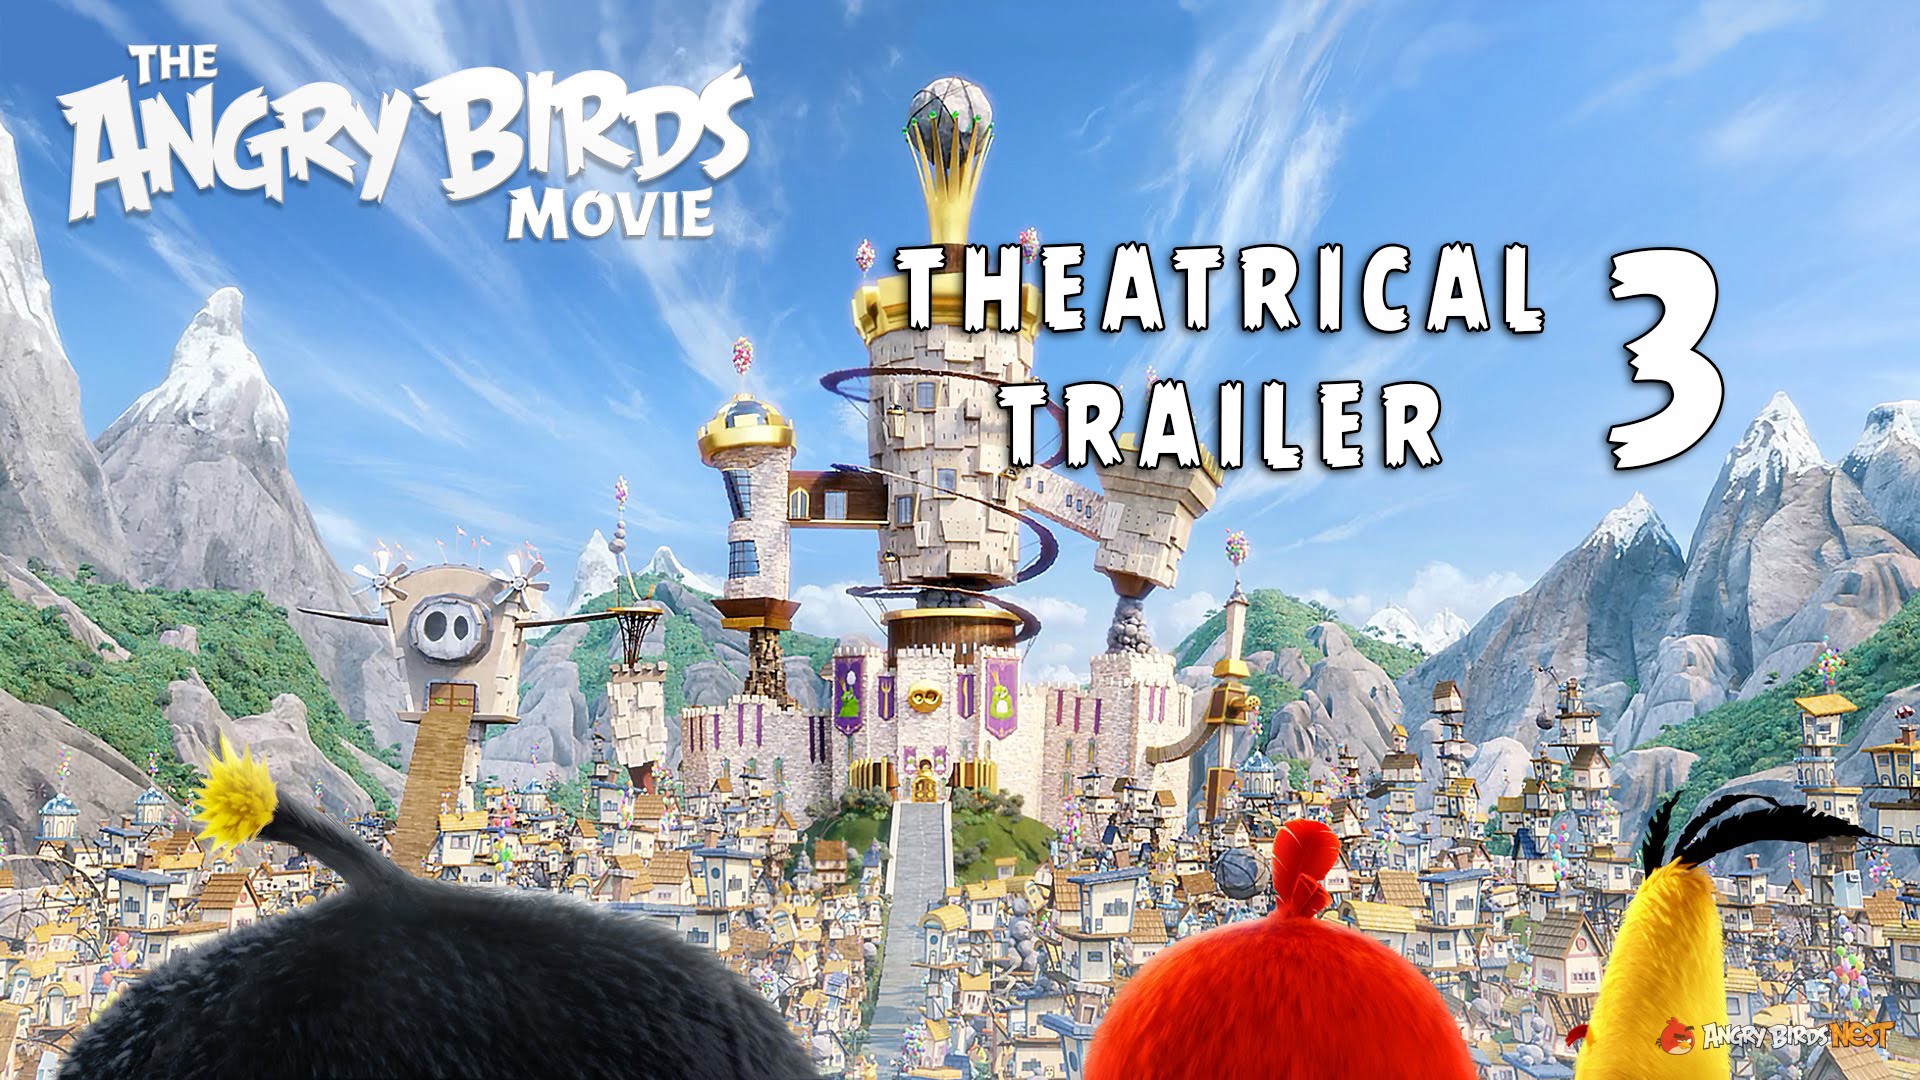 The Angry Birds Movie - Official Theatrical Trailer 3 copy